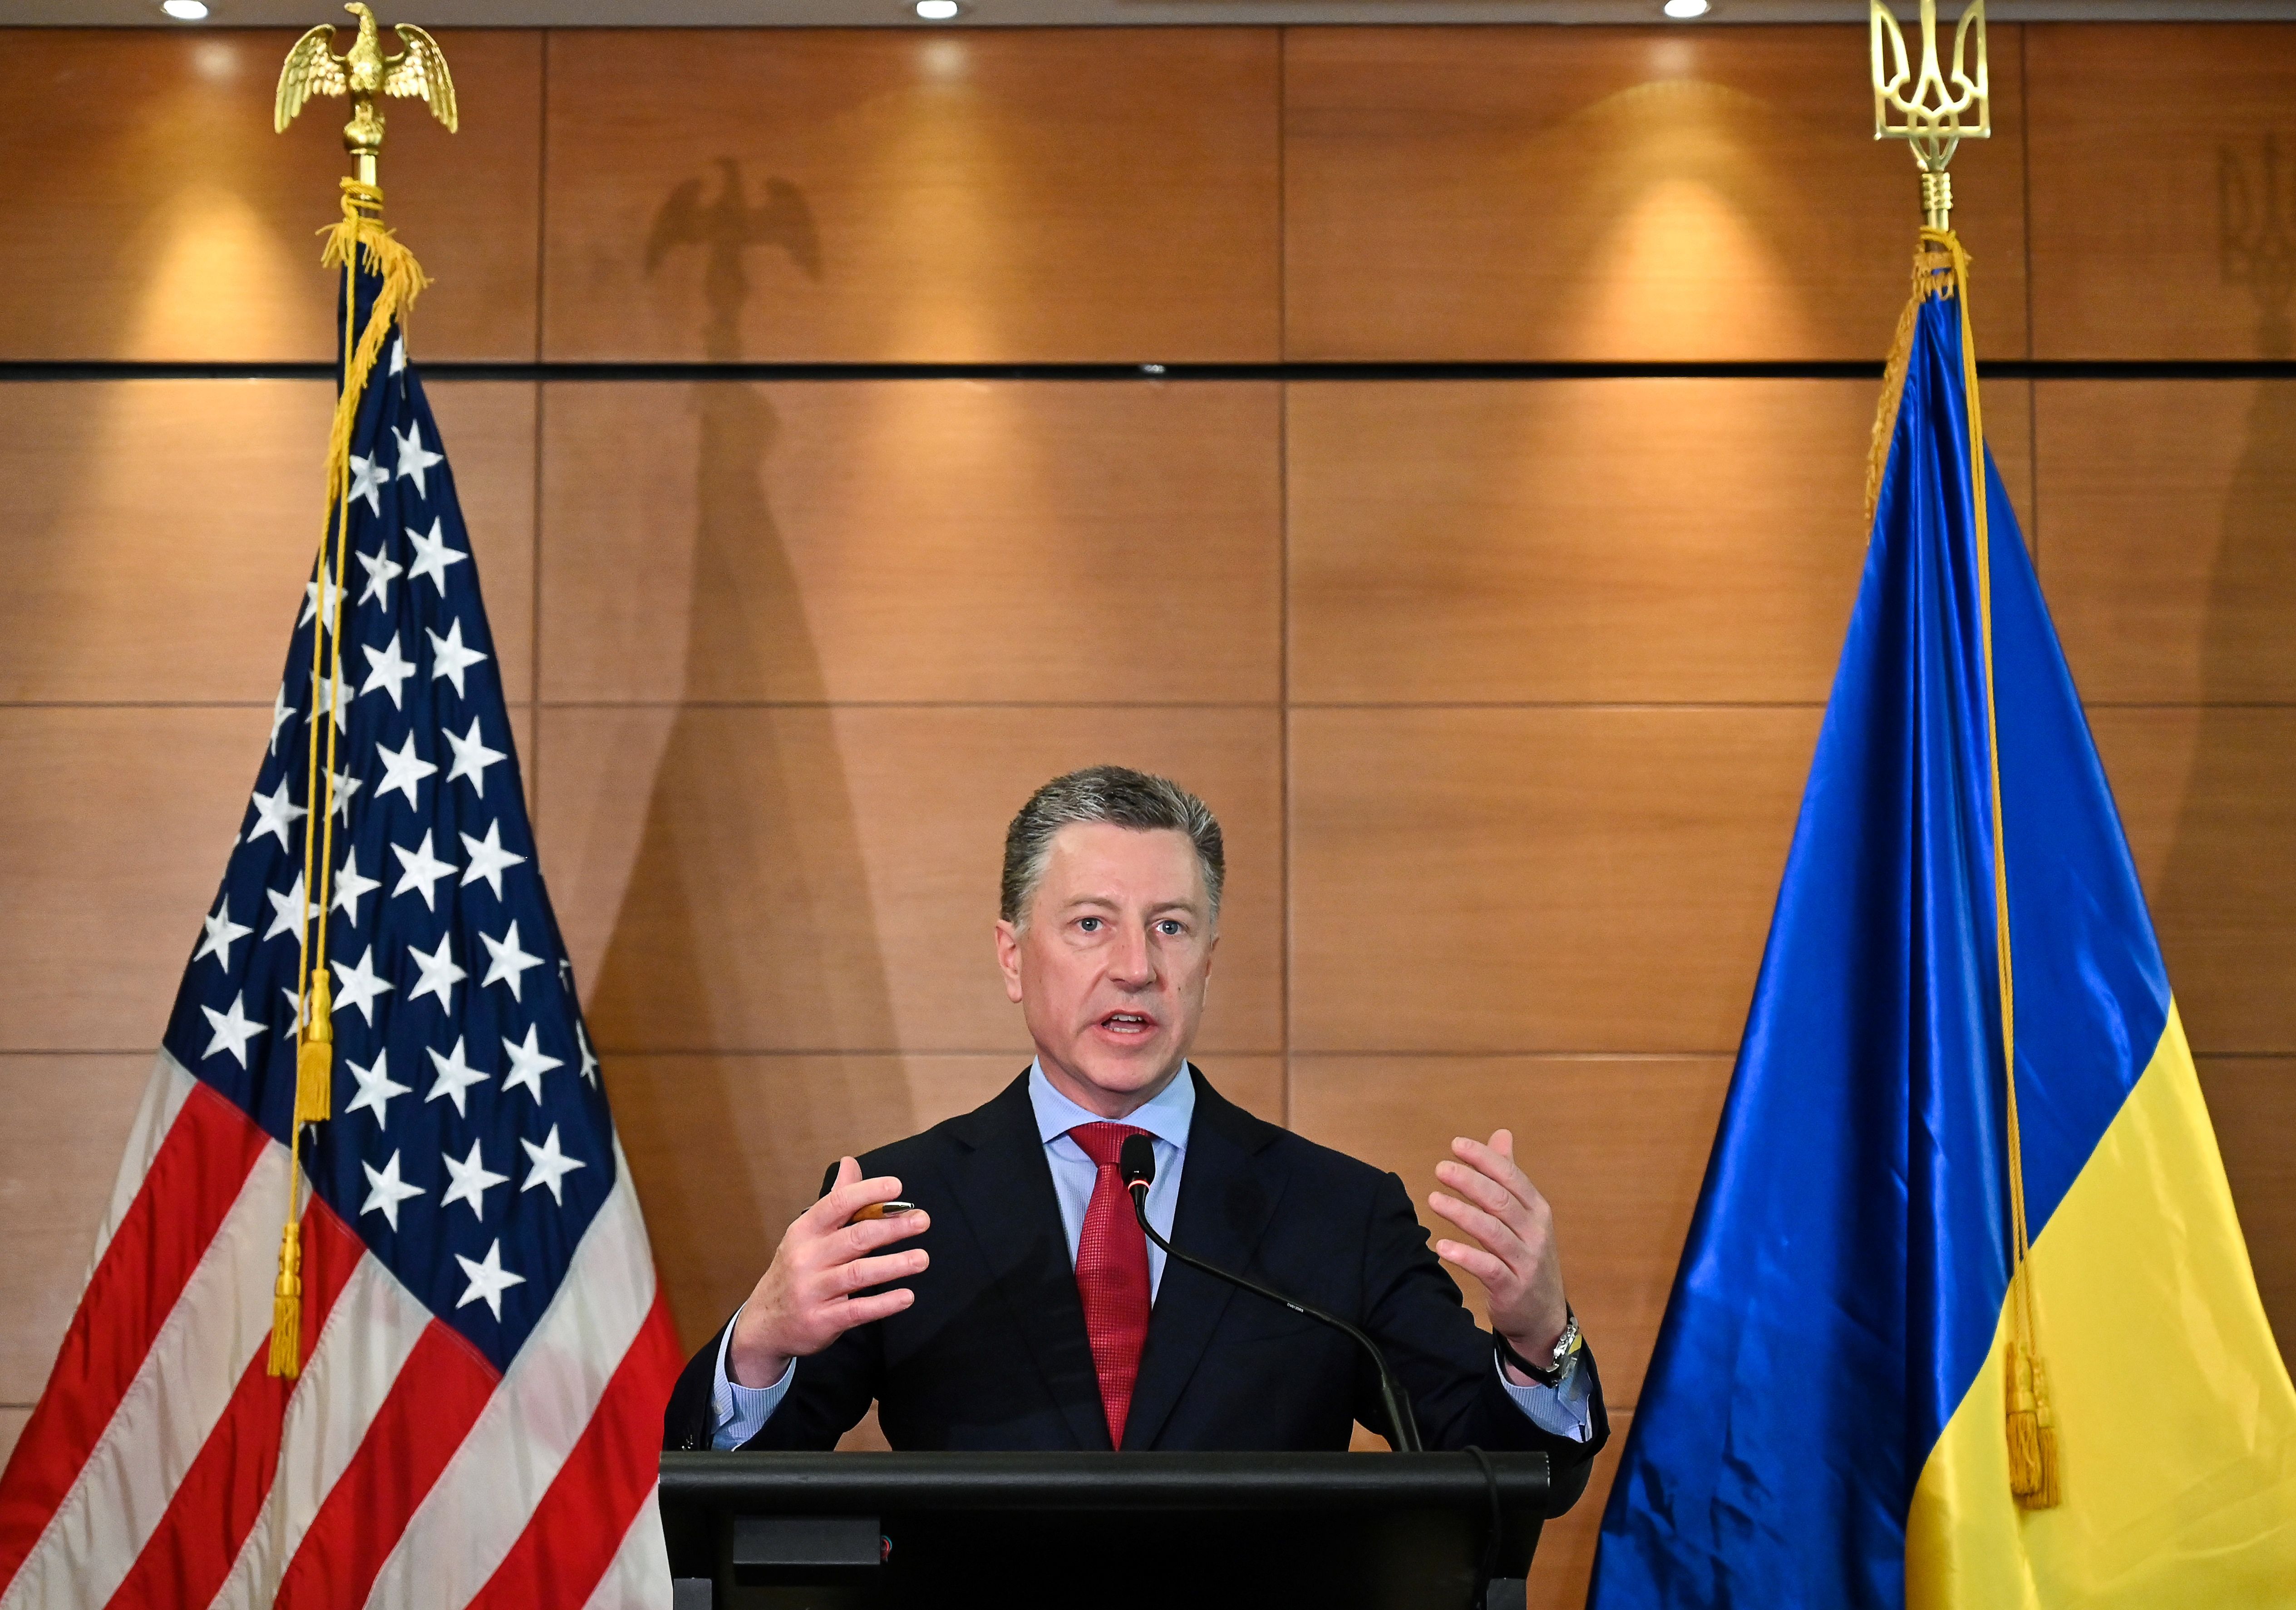 In this file photo, Kurt Volker, US special envoy for Ukraine, speaks during a news conference in Kiev on July 27, 2019.